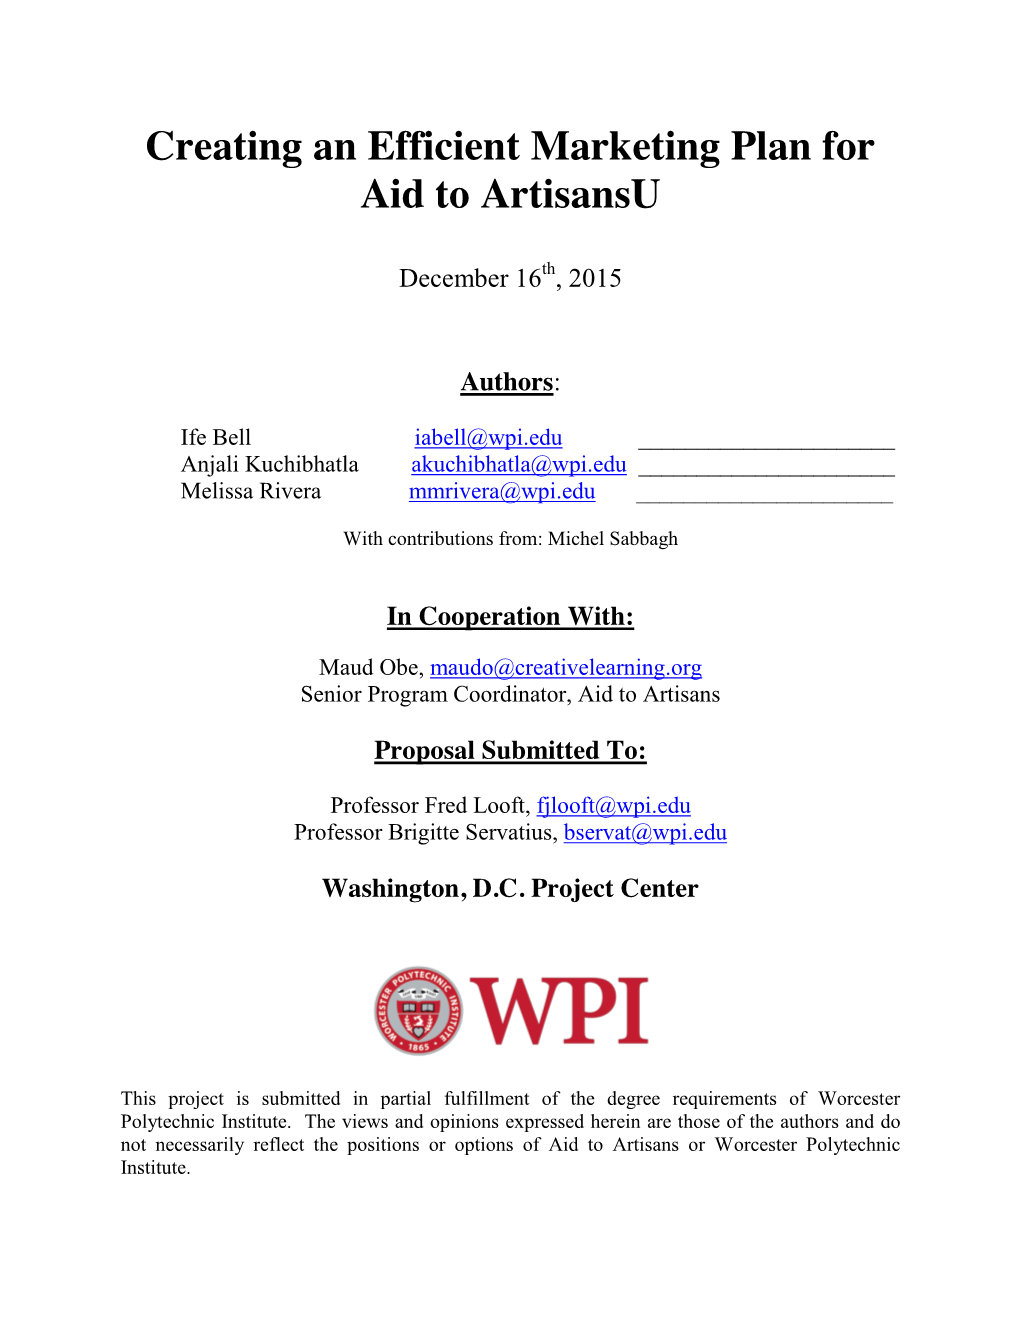 Creating an Efficient Marketing Plan for Aid to Artisansu